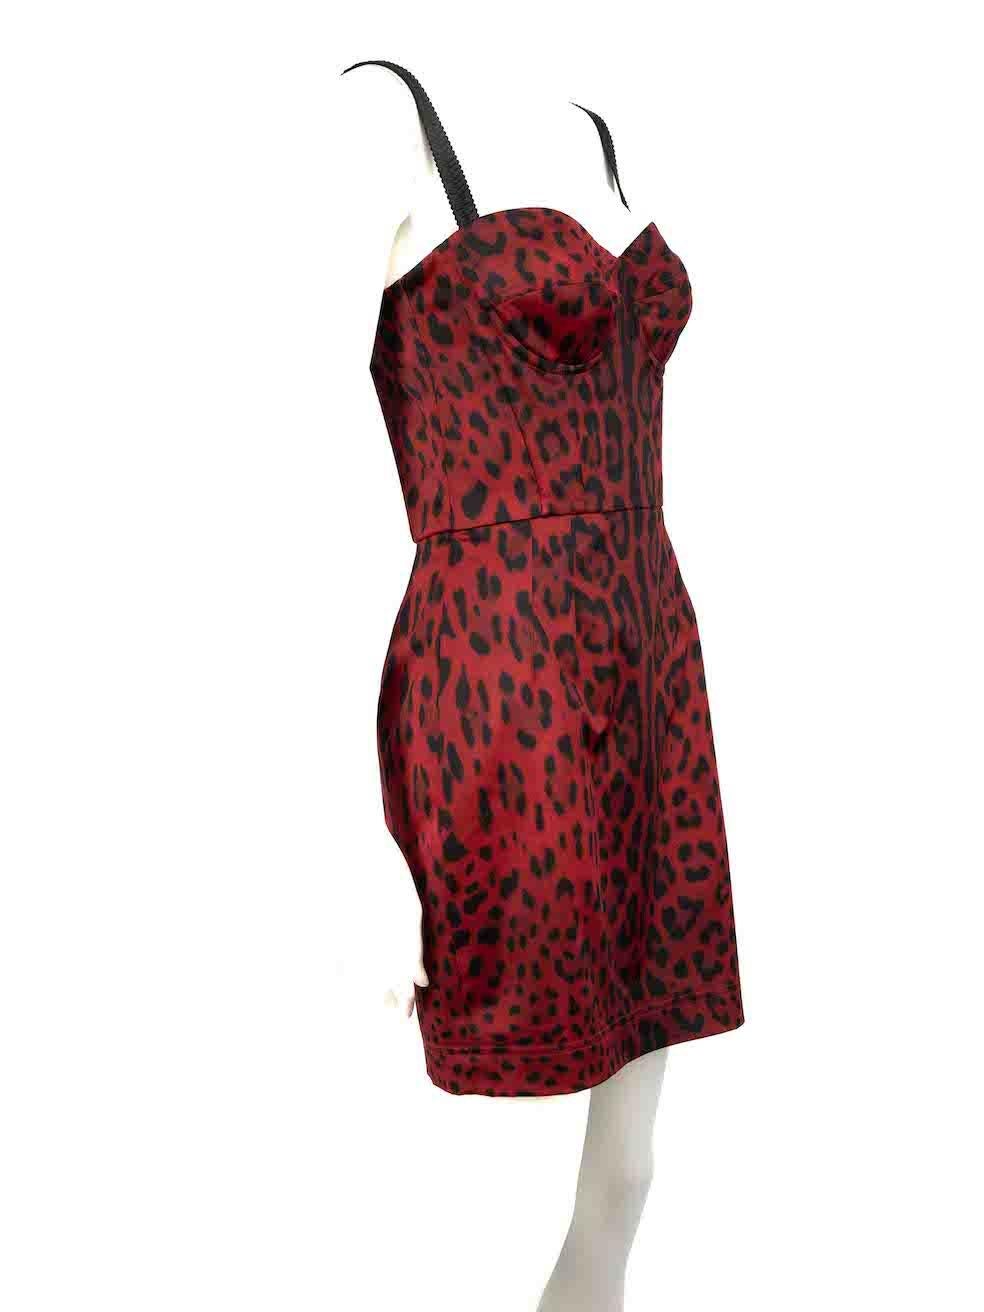 CONDITION is Very good. Minimal wear to dress is evident. Minimal scuffs to front lining on hemline on this used Dolce & Gabbana designer resale item.
 
 
 
 Details
 
 
 Red
 
 Polyester
 
 Bodycon dress
 
 Leopard print
 
 Sleeveless
 
 Sweetheart